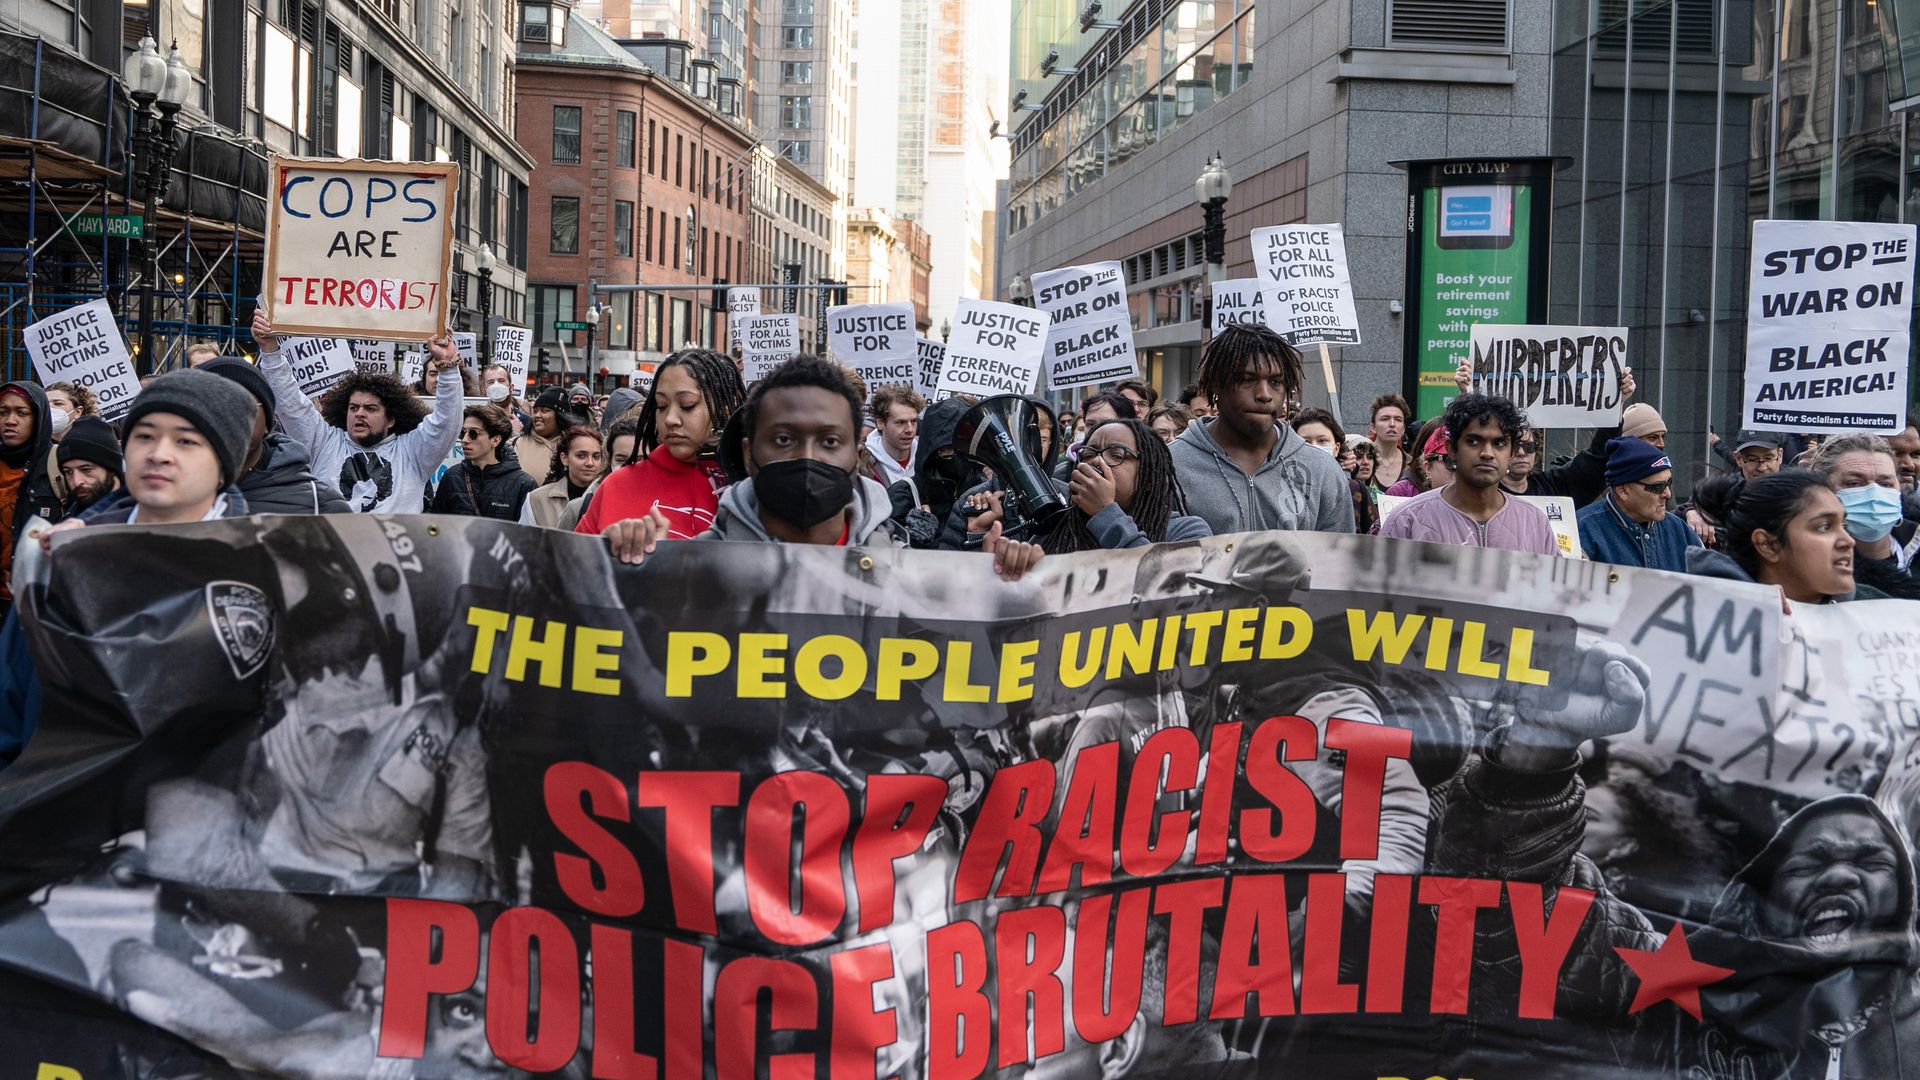 Countless people with signs stand march with a banner in front that says "The people united will stop racist police brutality."